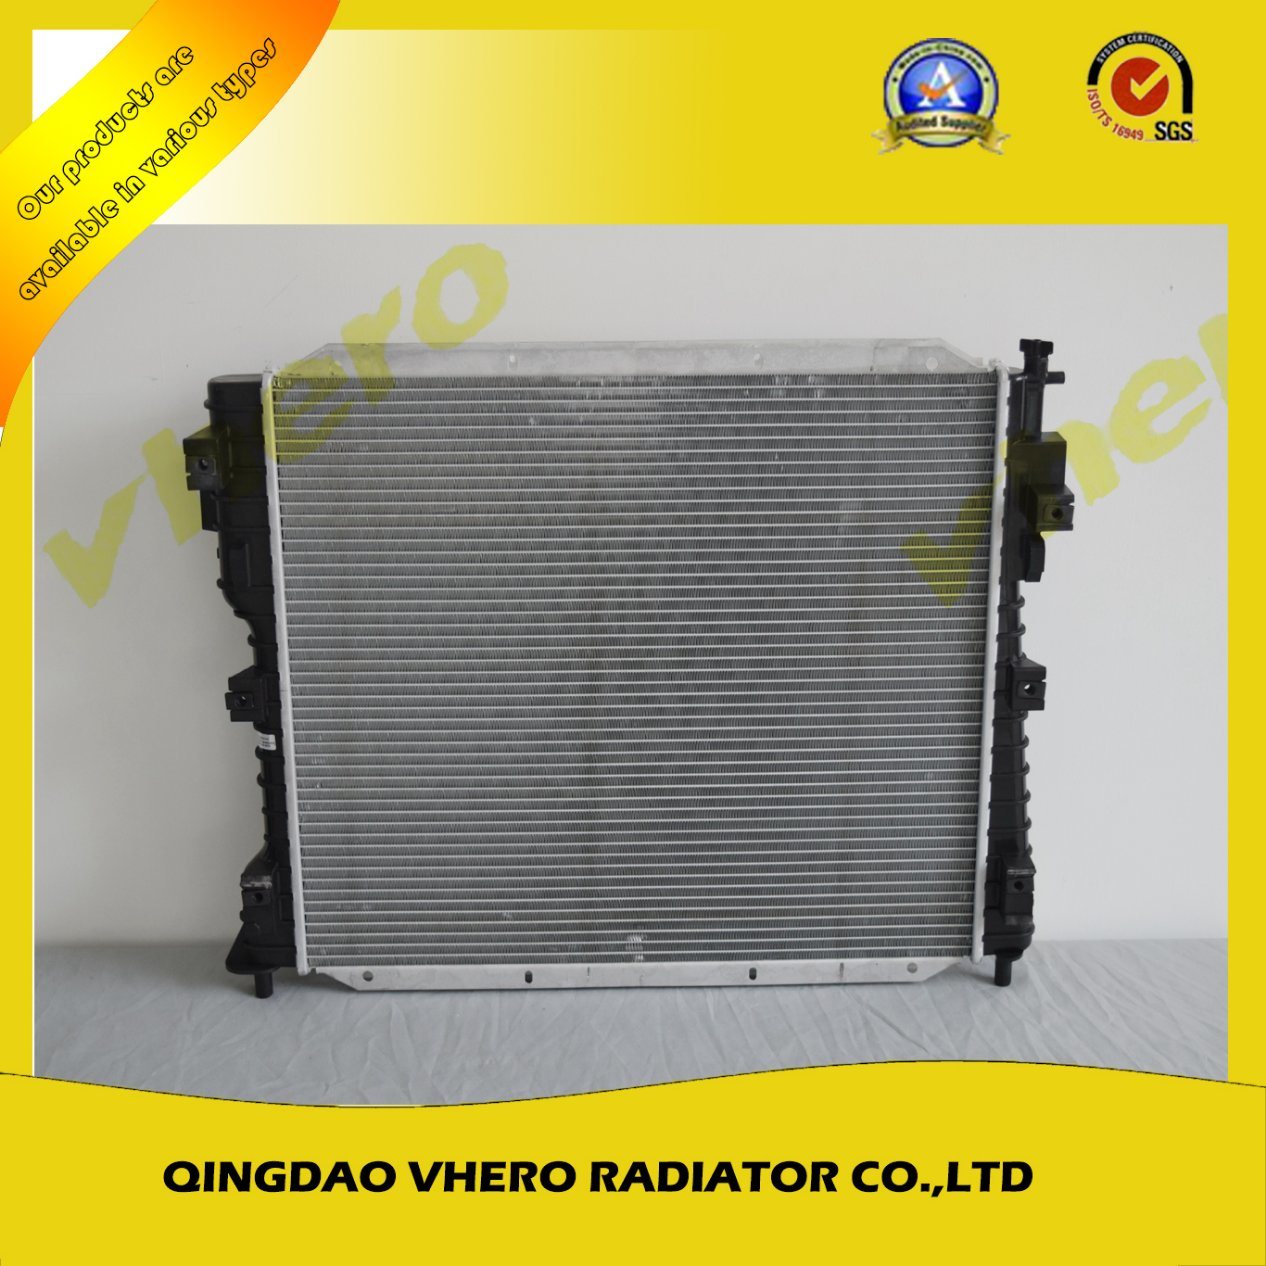 Auto Radiator for Ford Mustang 05-14, OEM: 4r338005ce